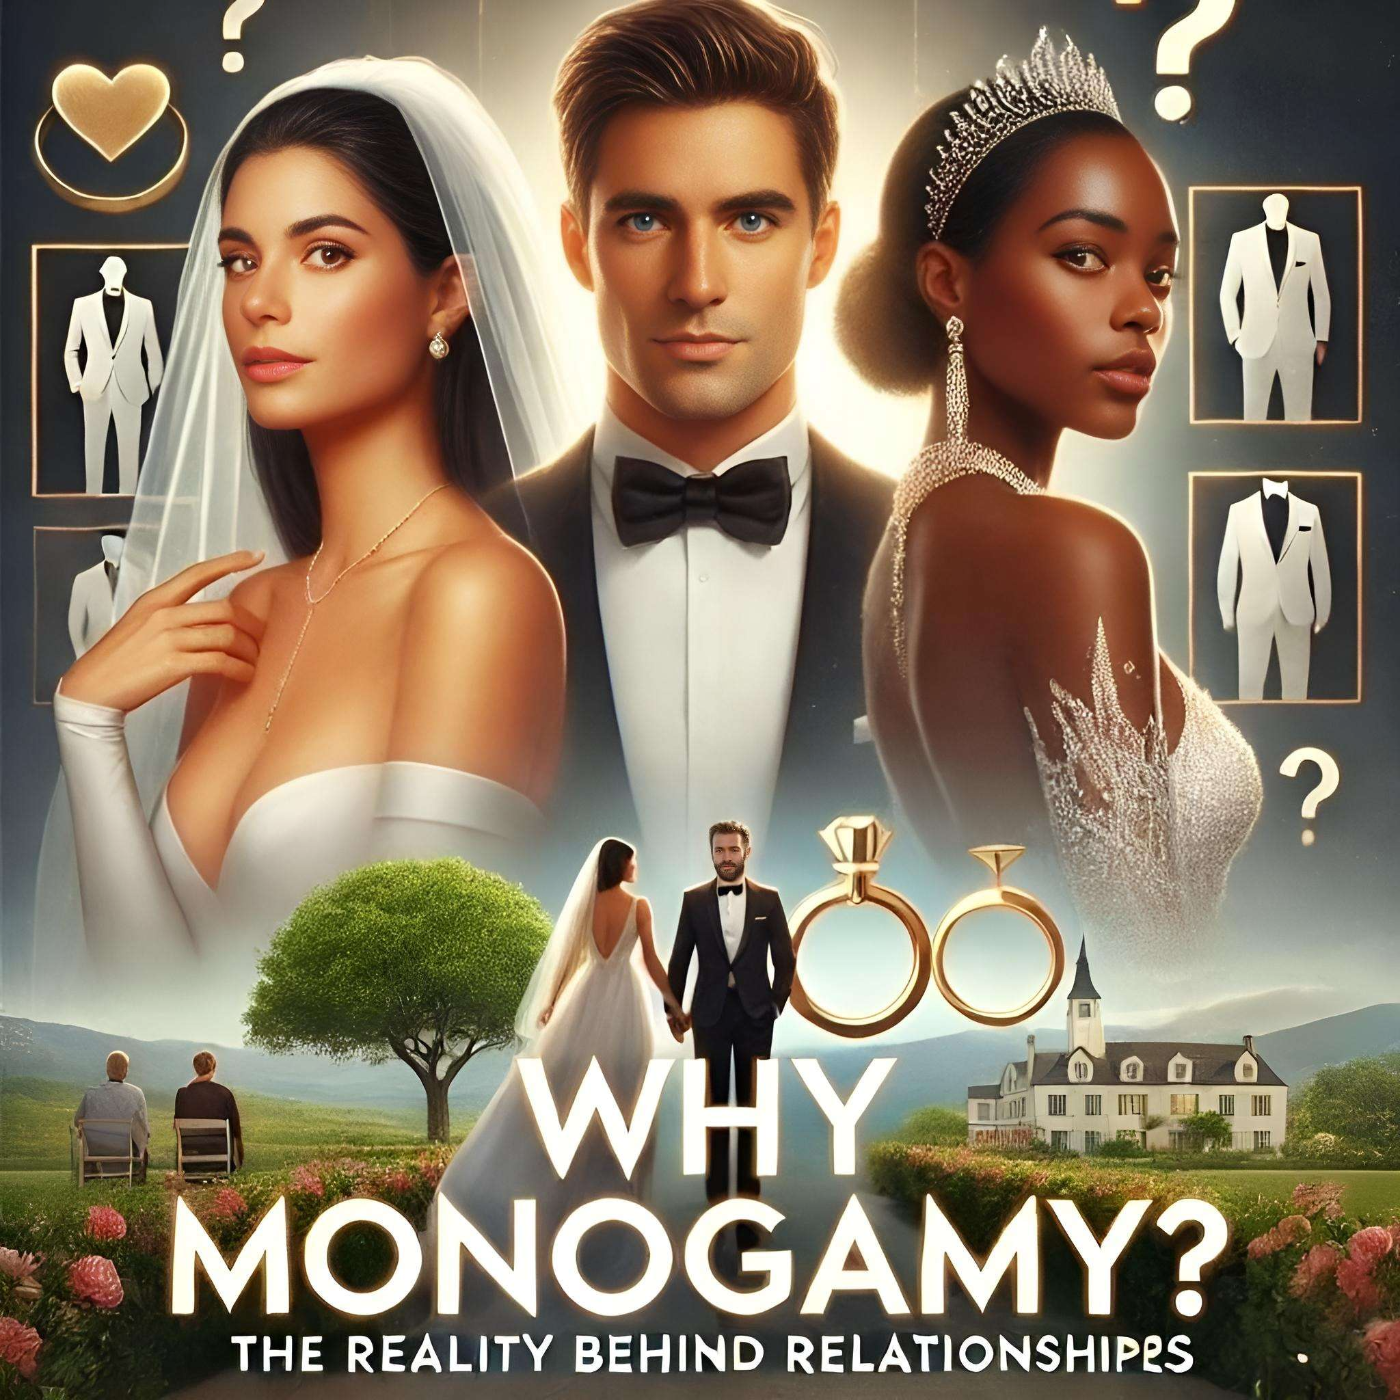 Why Do Women Push Monogamy? Unpacking the Reality Behind the Relationship Dynamic